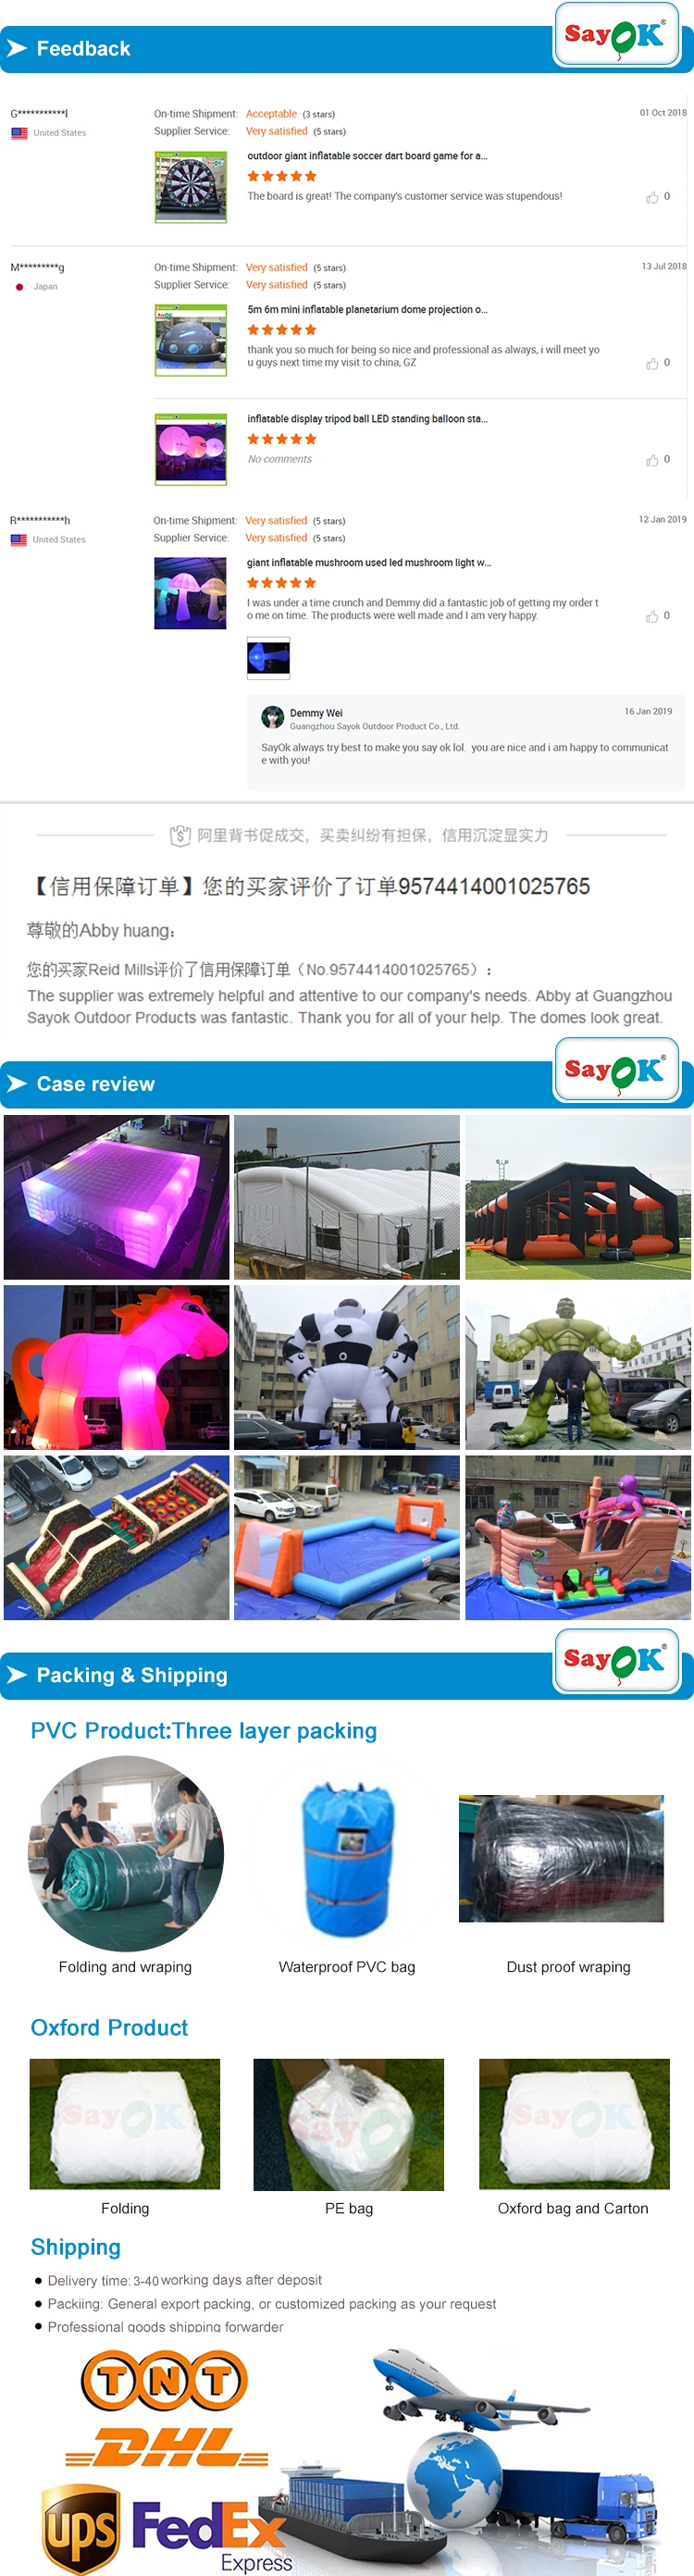 High Quality Camel Model Inflatable Model for Sale Factory Price Giant Custom Inflatable Advertising Design Cartoon Mascot Model for Outdoor Events